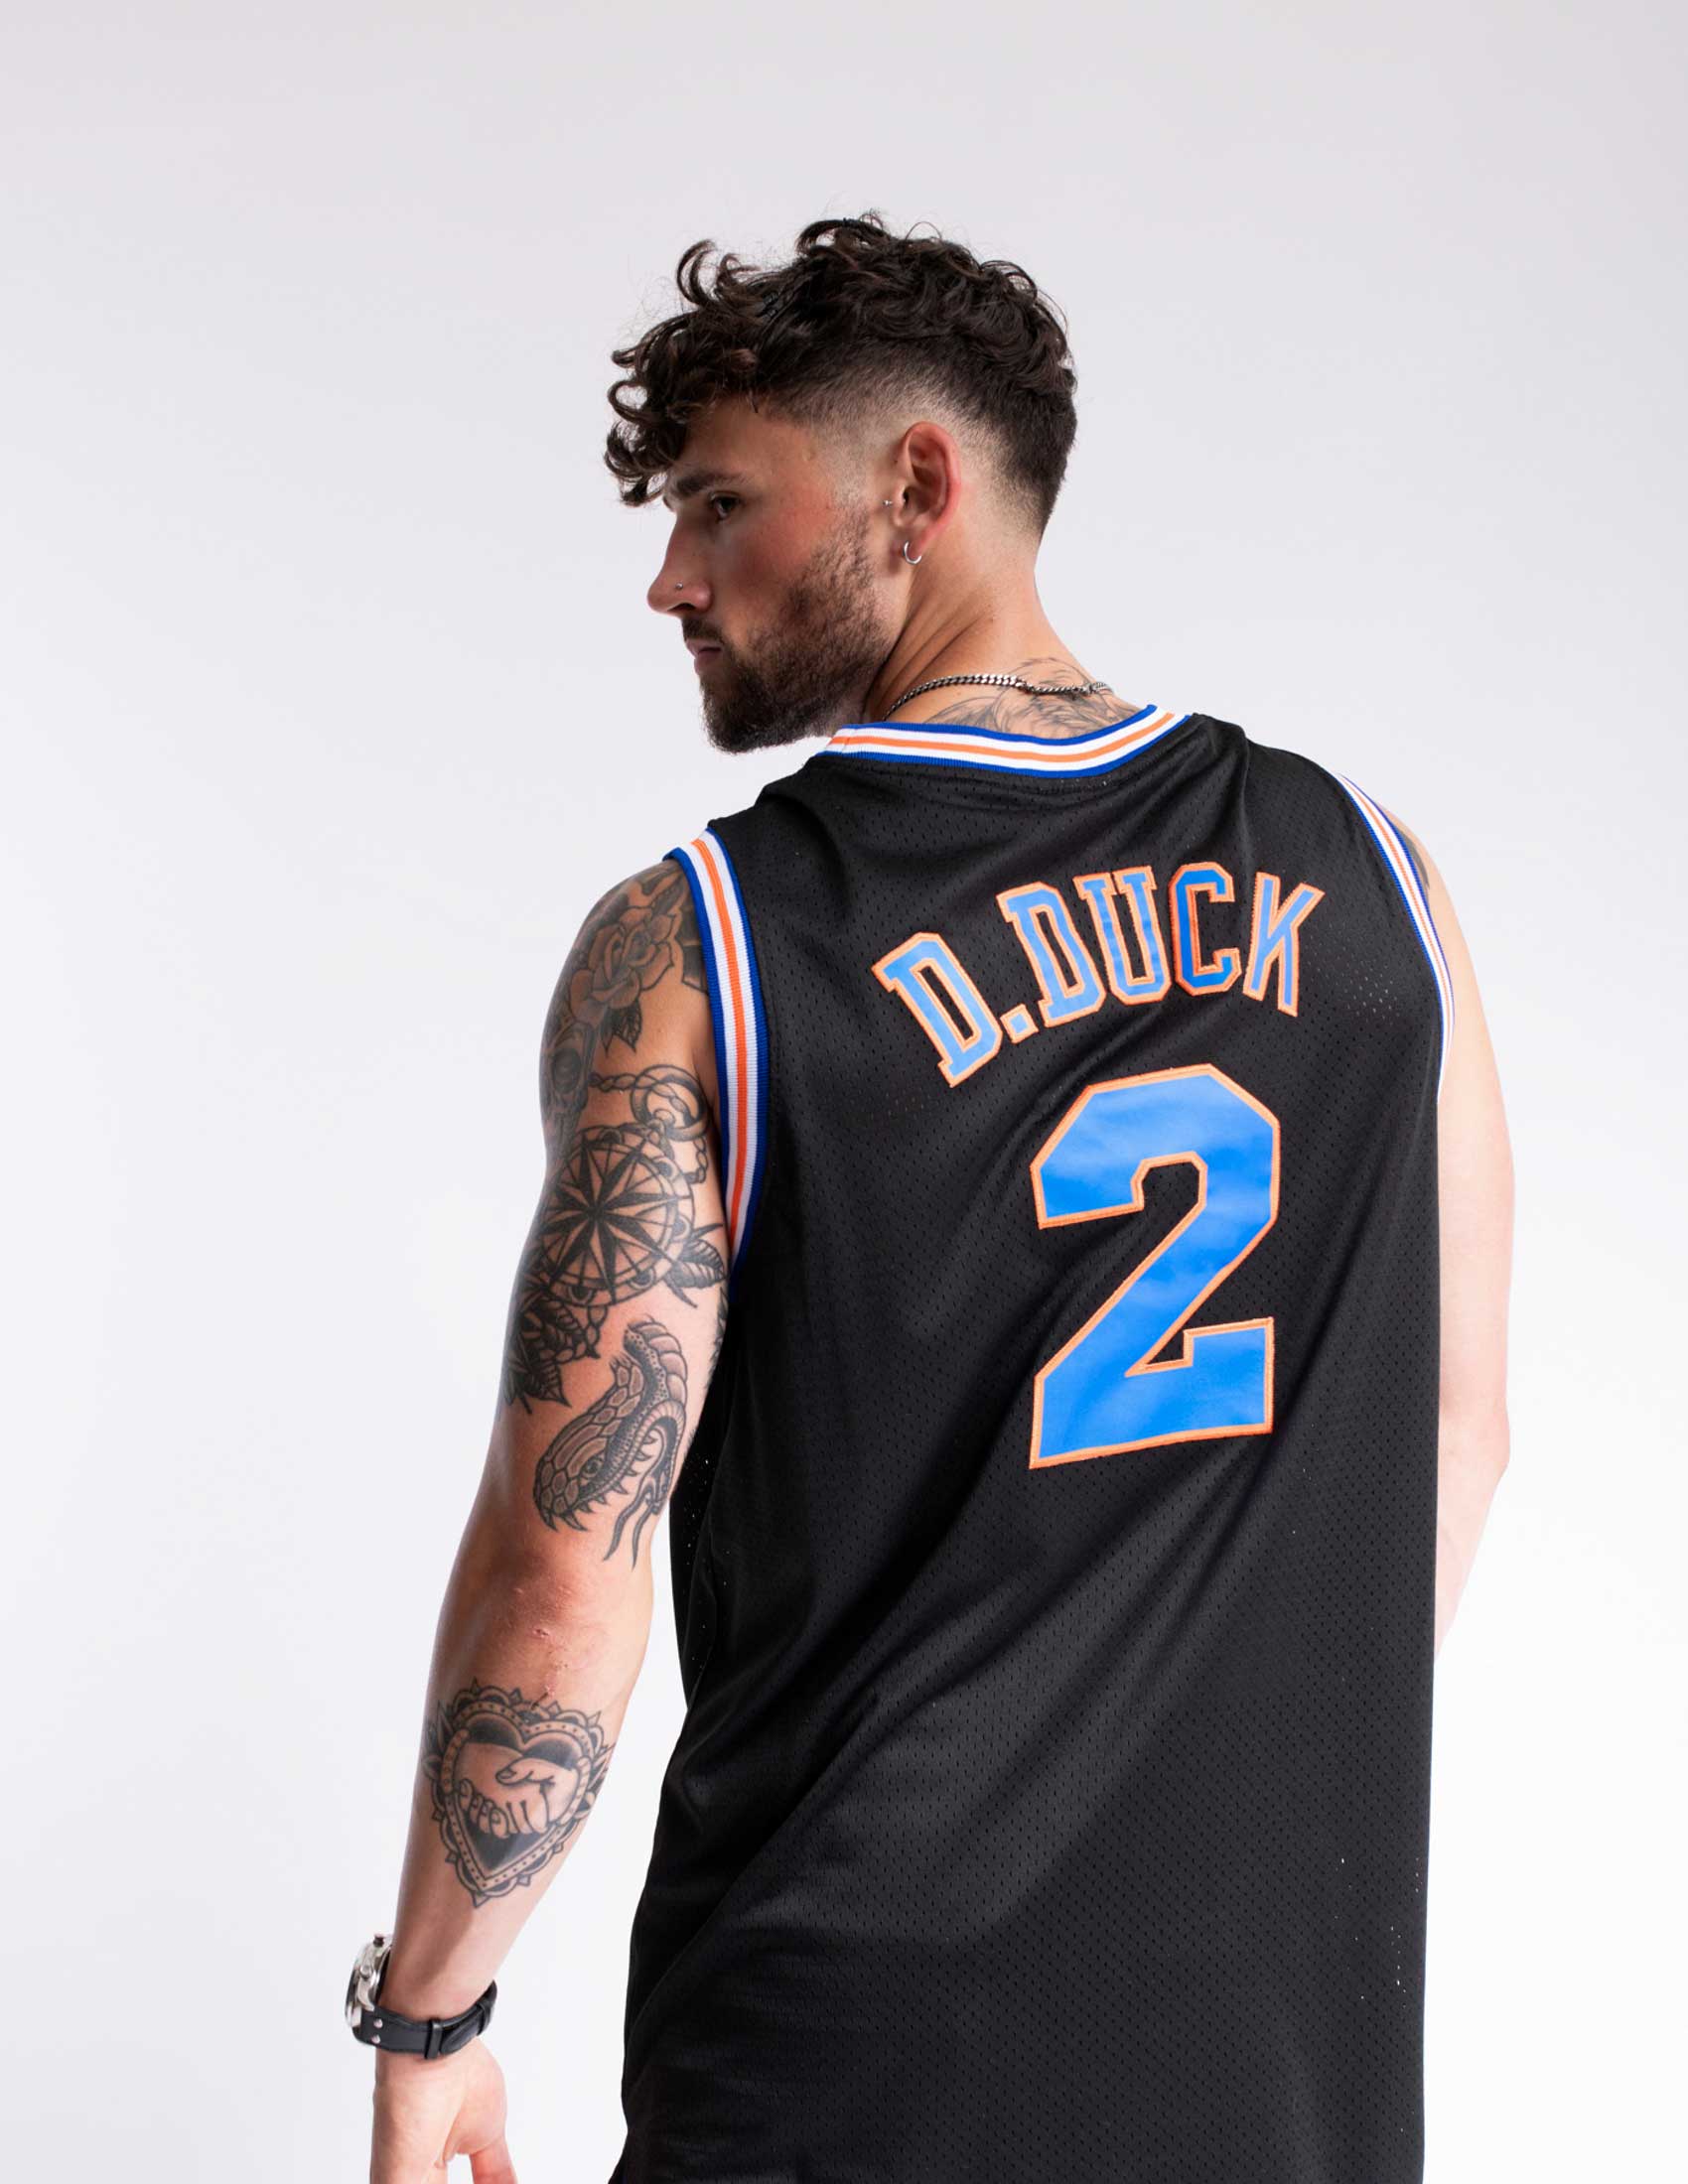  Mens Basketball Jersey #2 D Duck 90s Moive Space